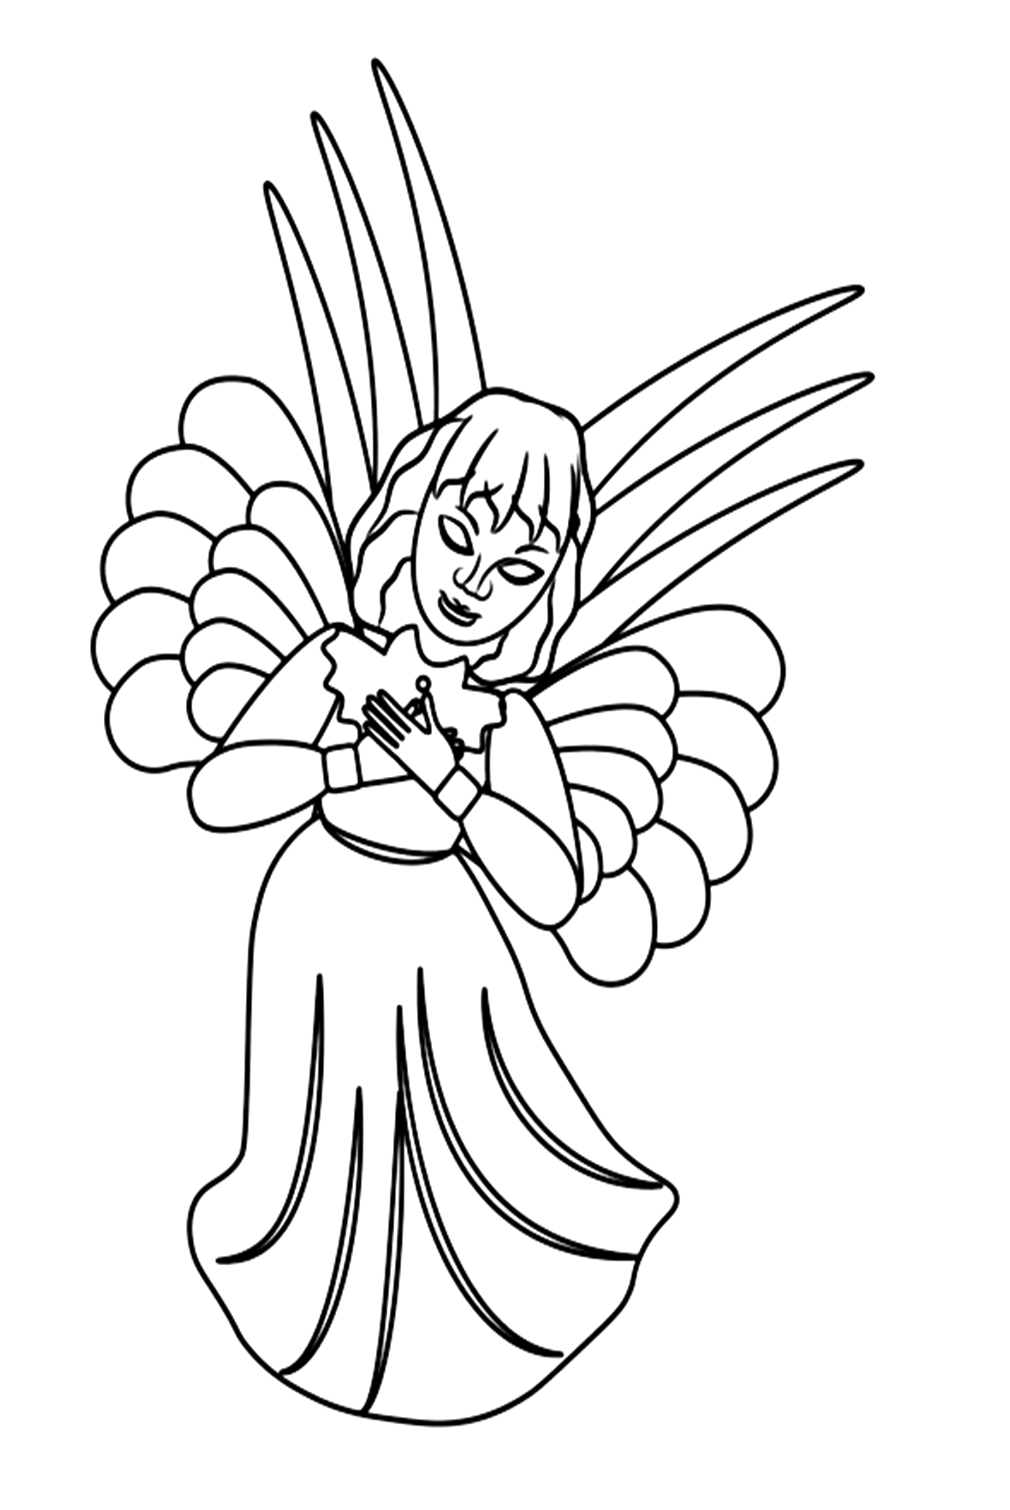 Angel Sleeping Coloring Pages